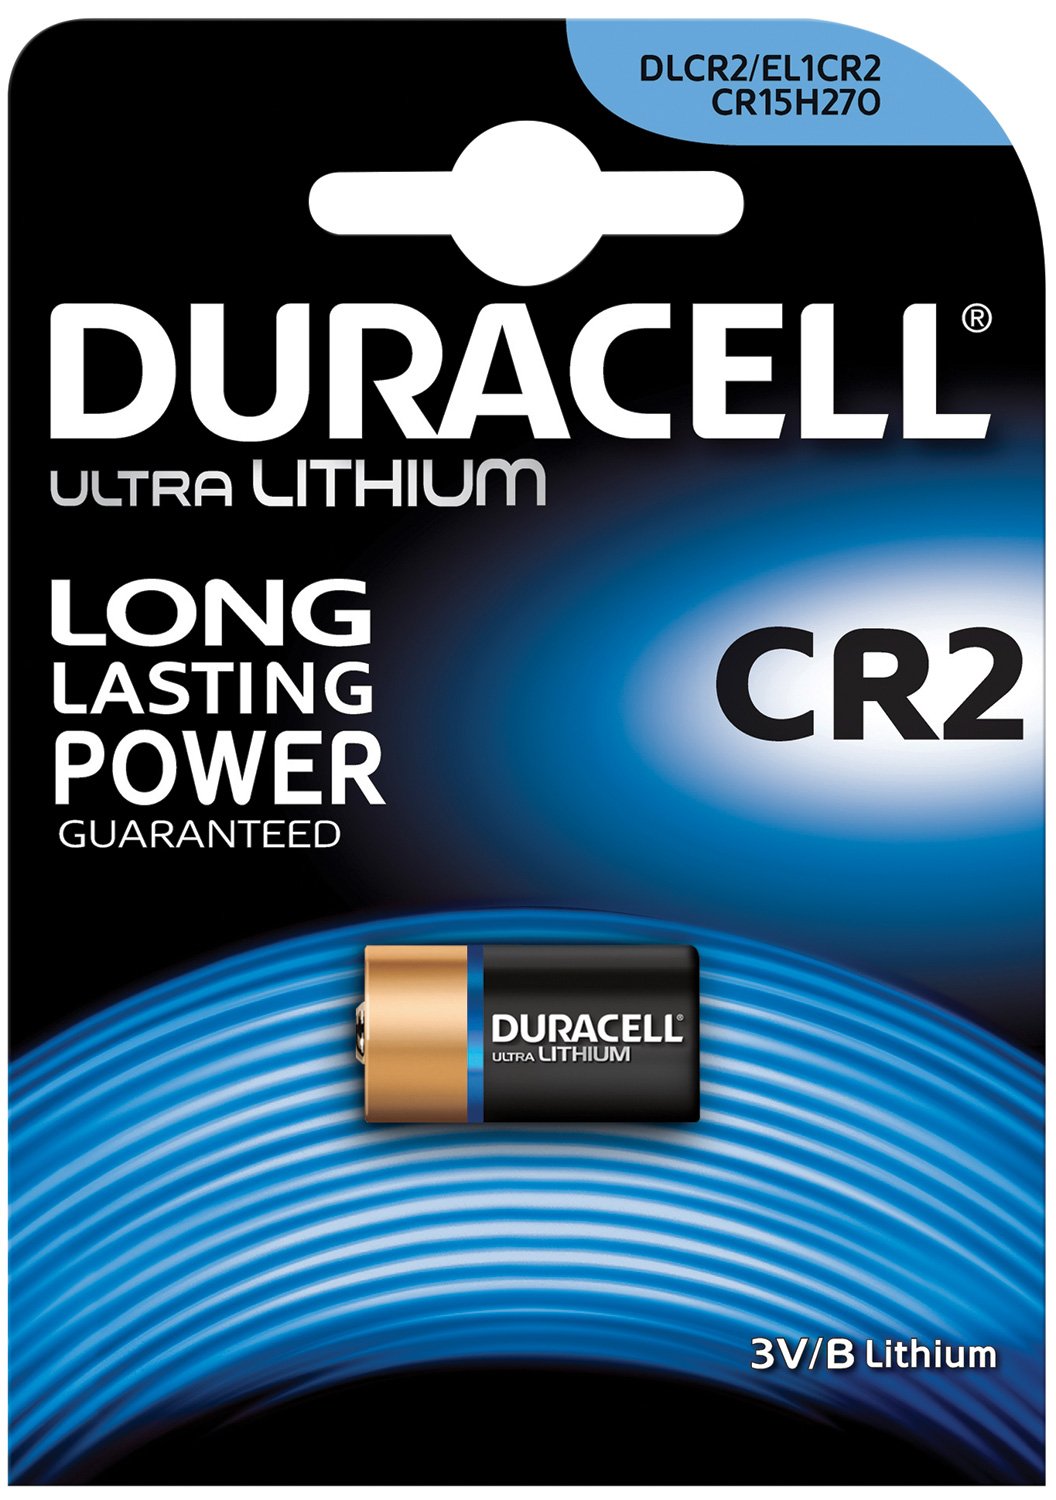 Duracell CR2 Lithium Battery CR2 Duracell Lithium Battery Single